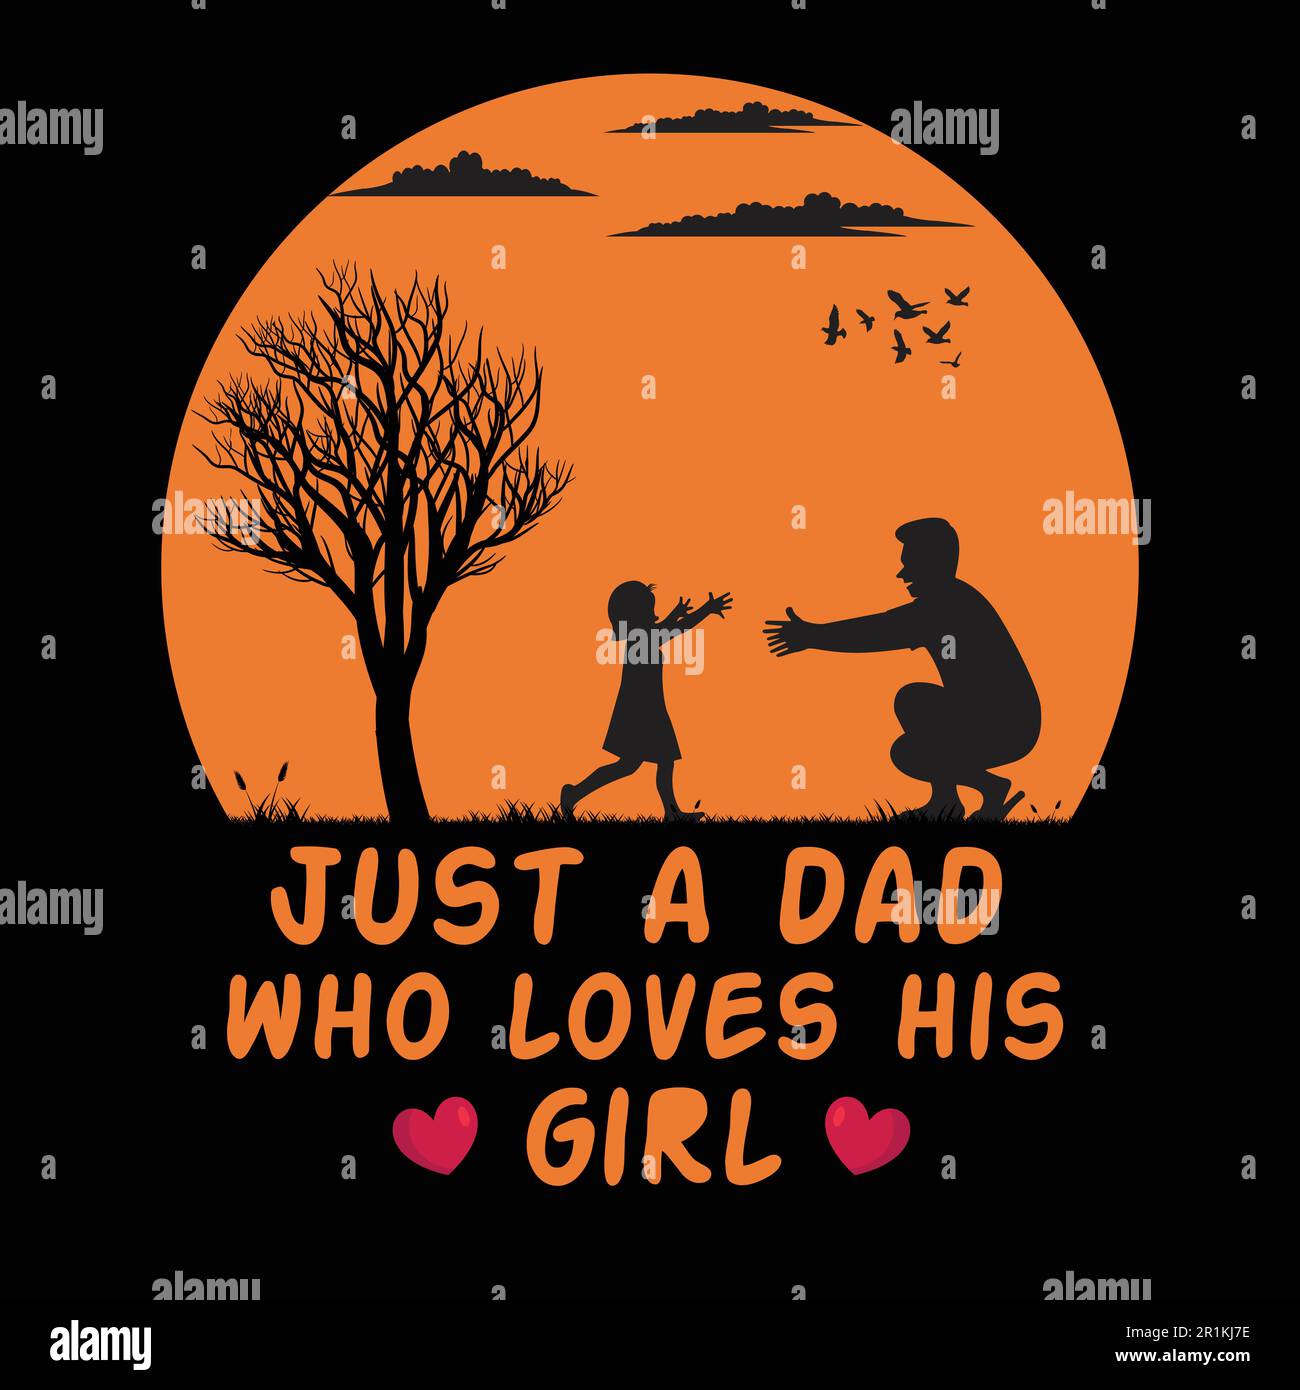 Just a dad who loves his girl- Fathers day t-shirt design Stock Vector